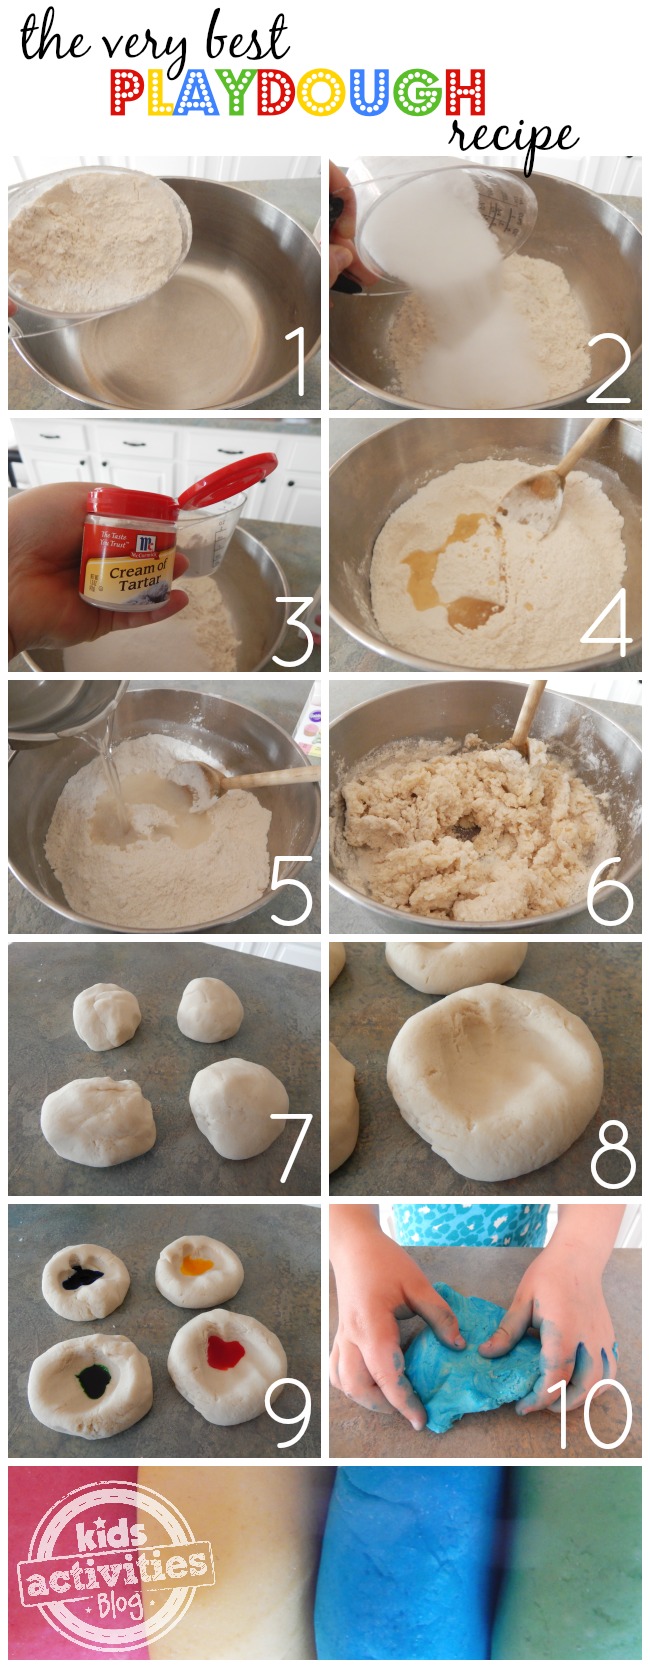 How to make playdough by adding flour in a metal bowl, salt, cream of tar tar, water, oil, mix and form! Add food coloring gel to make red, yellow, blue, and green homemade playdough.